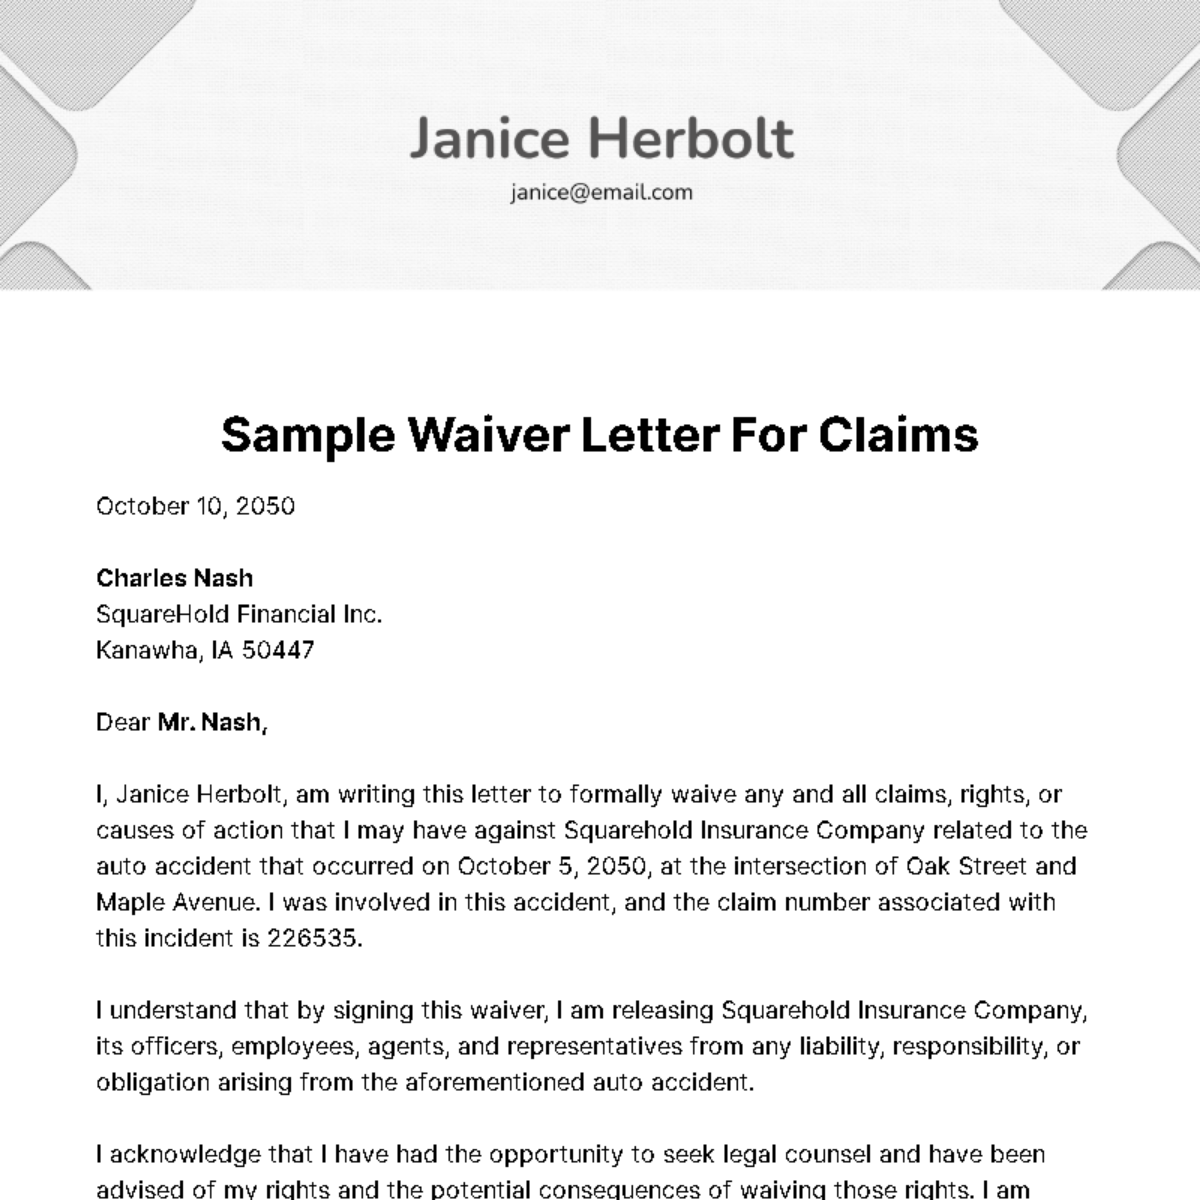 Sample Waiver Letter for Claims Template